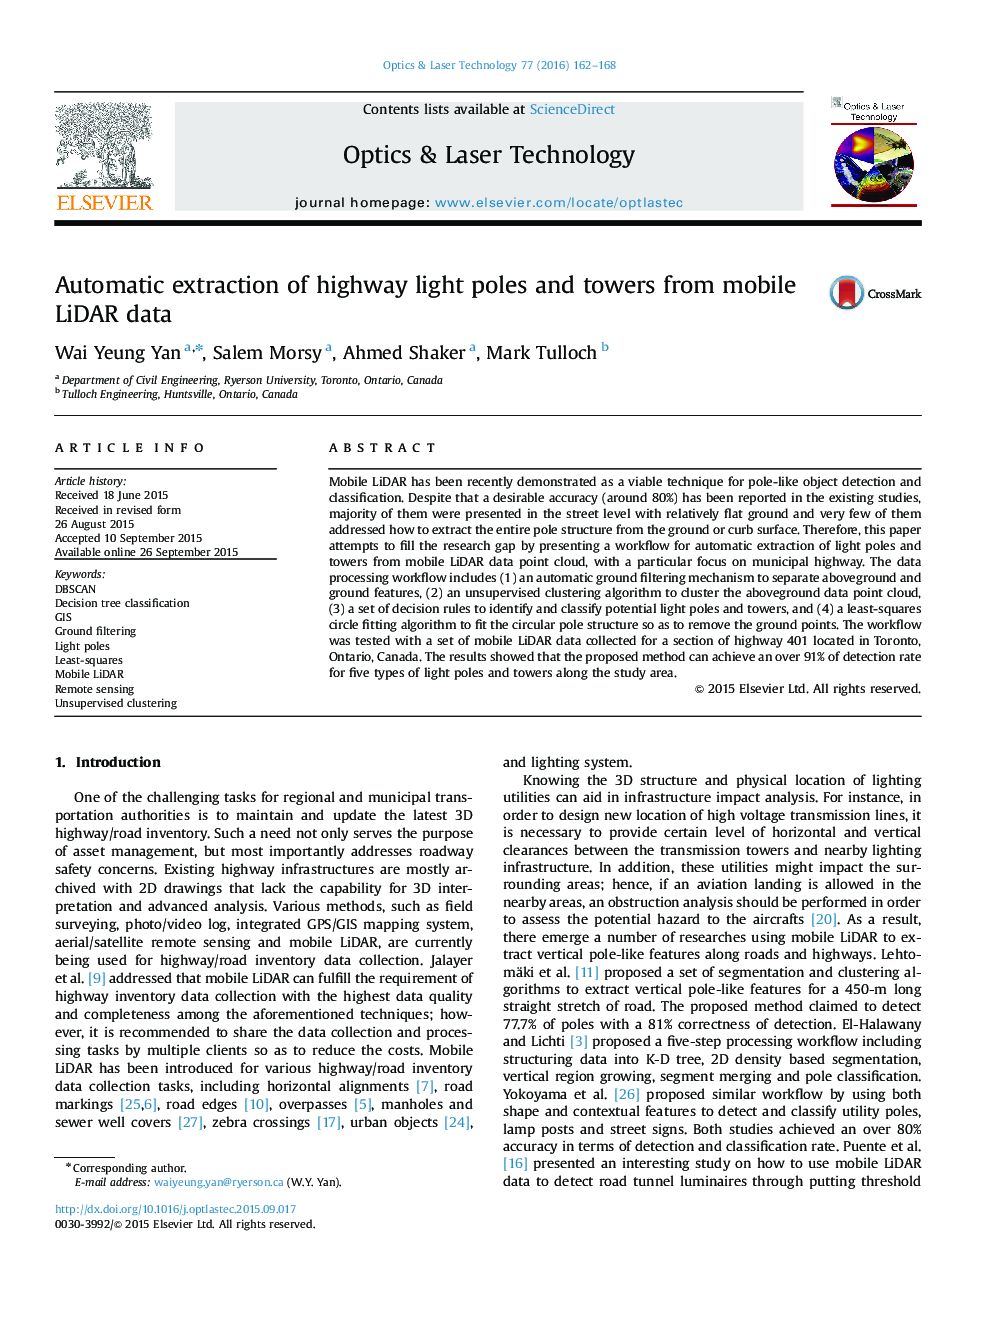 Automatic extraction of highway light poles and towers from mobile LiDAR data